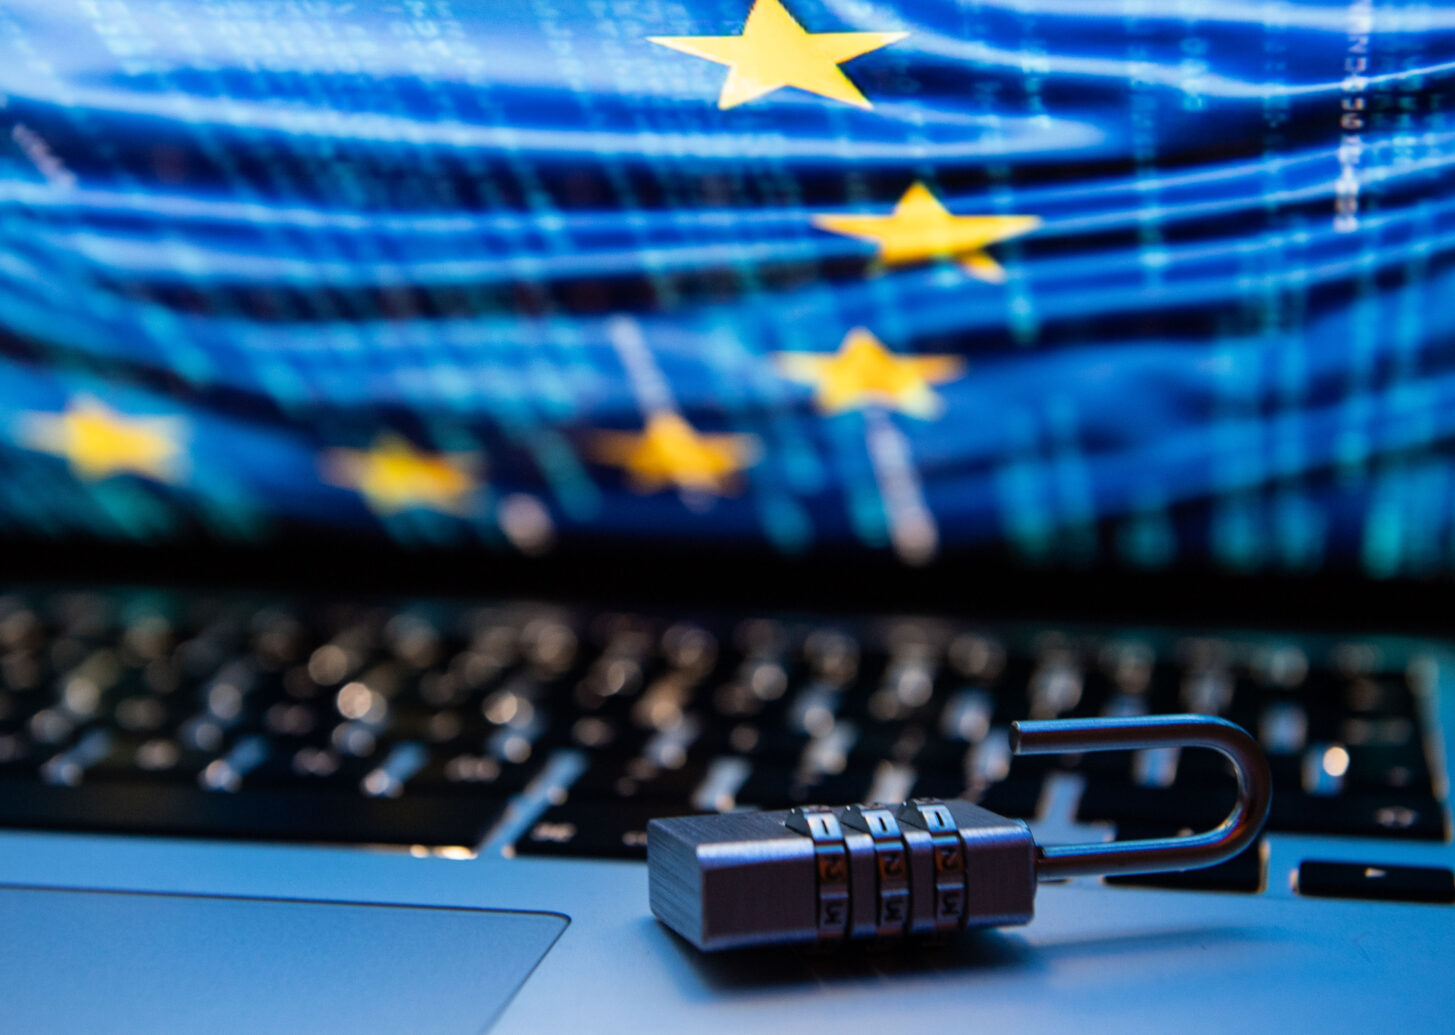 Cybersecurity: policies & programmes for young European citizens